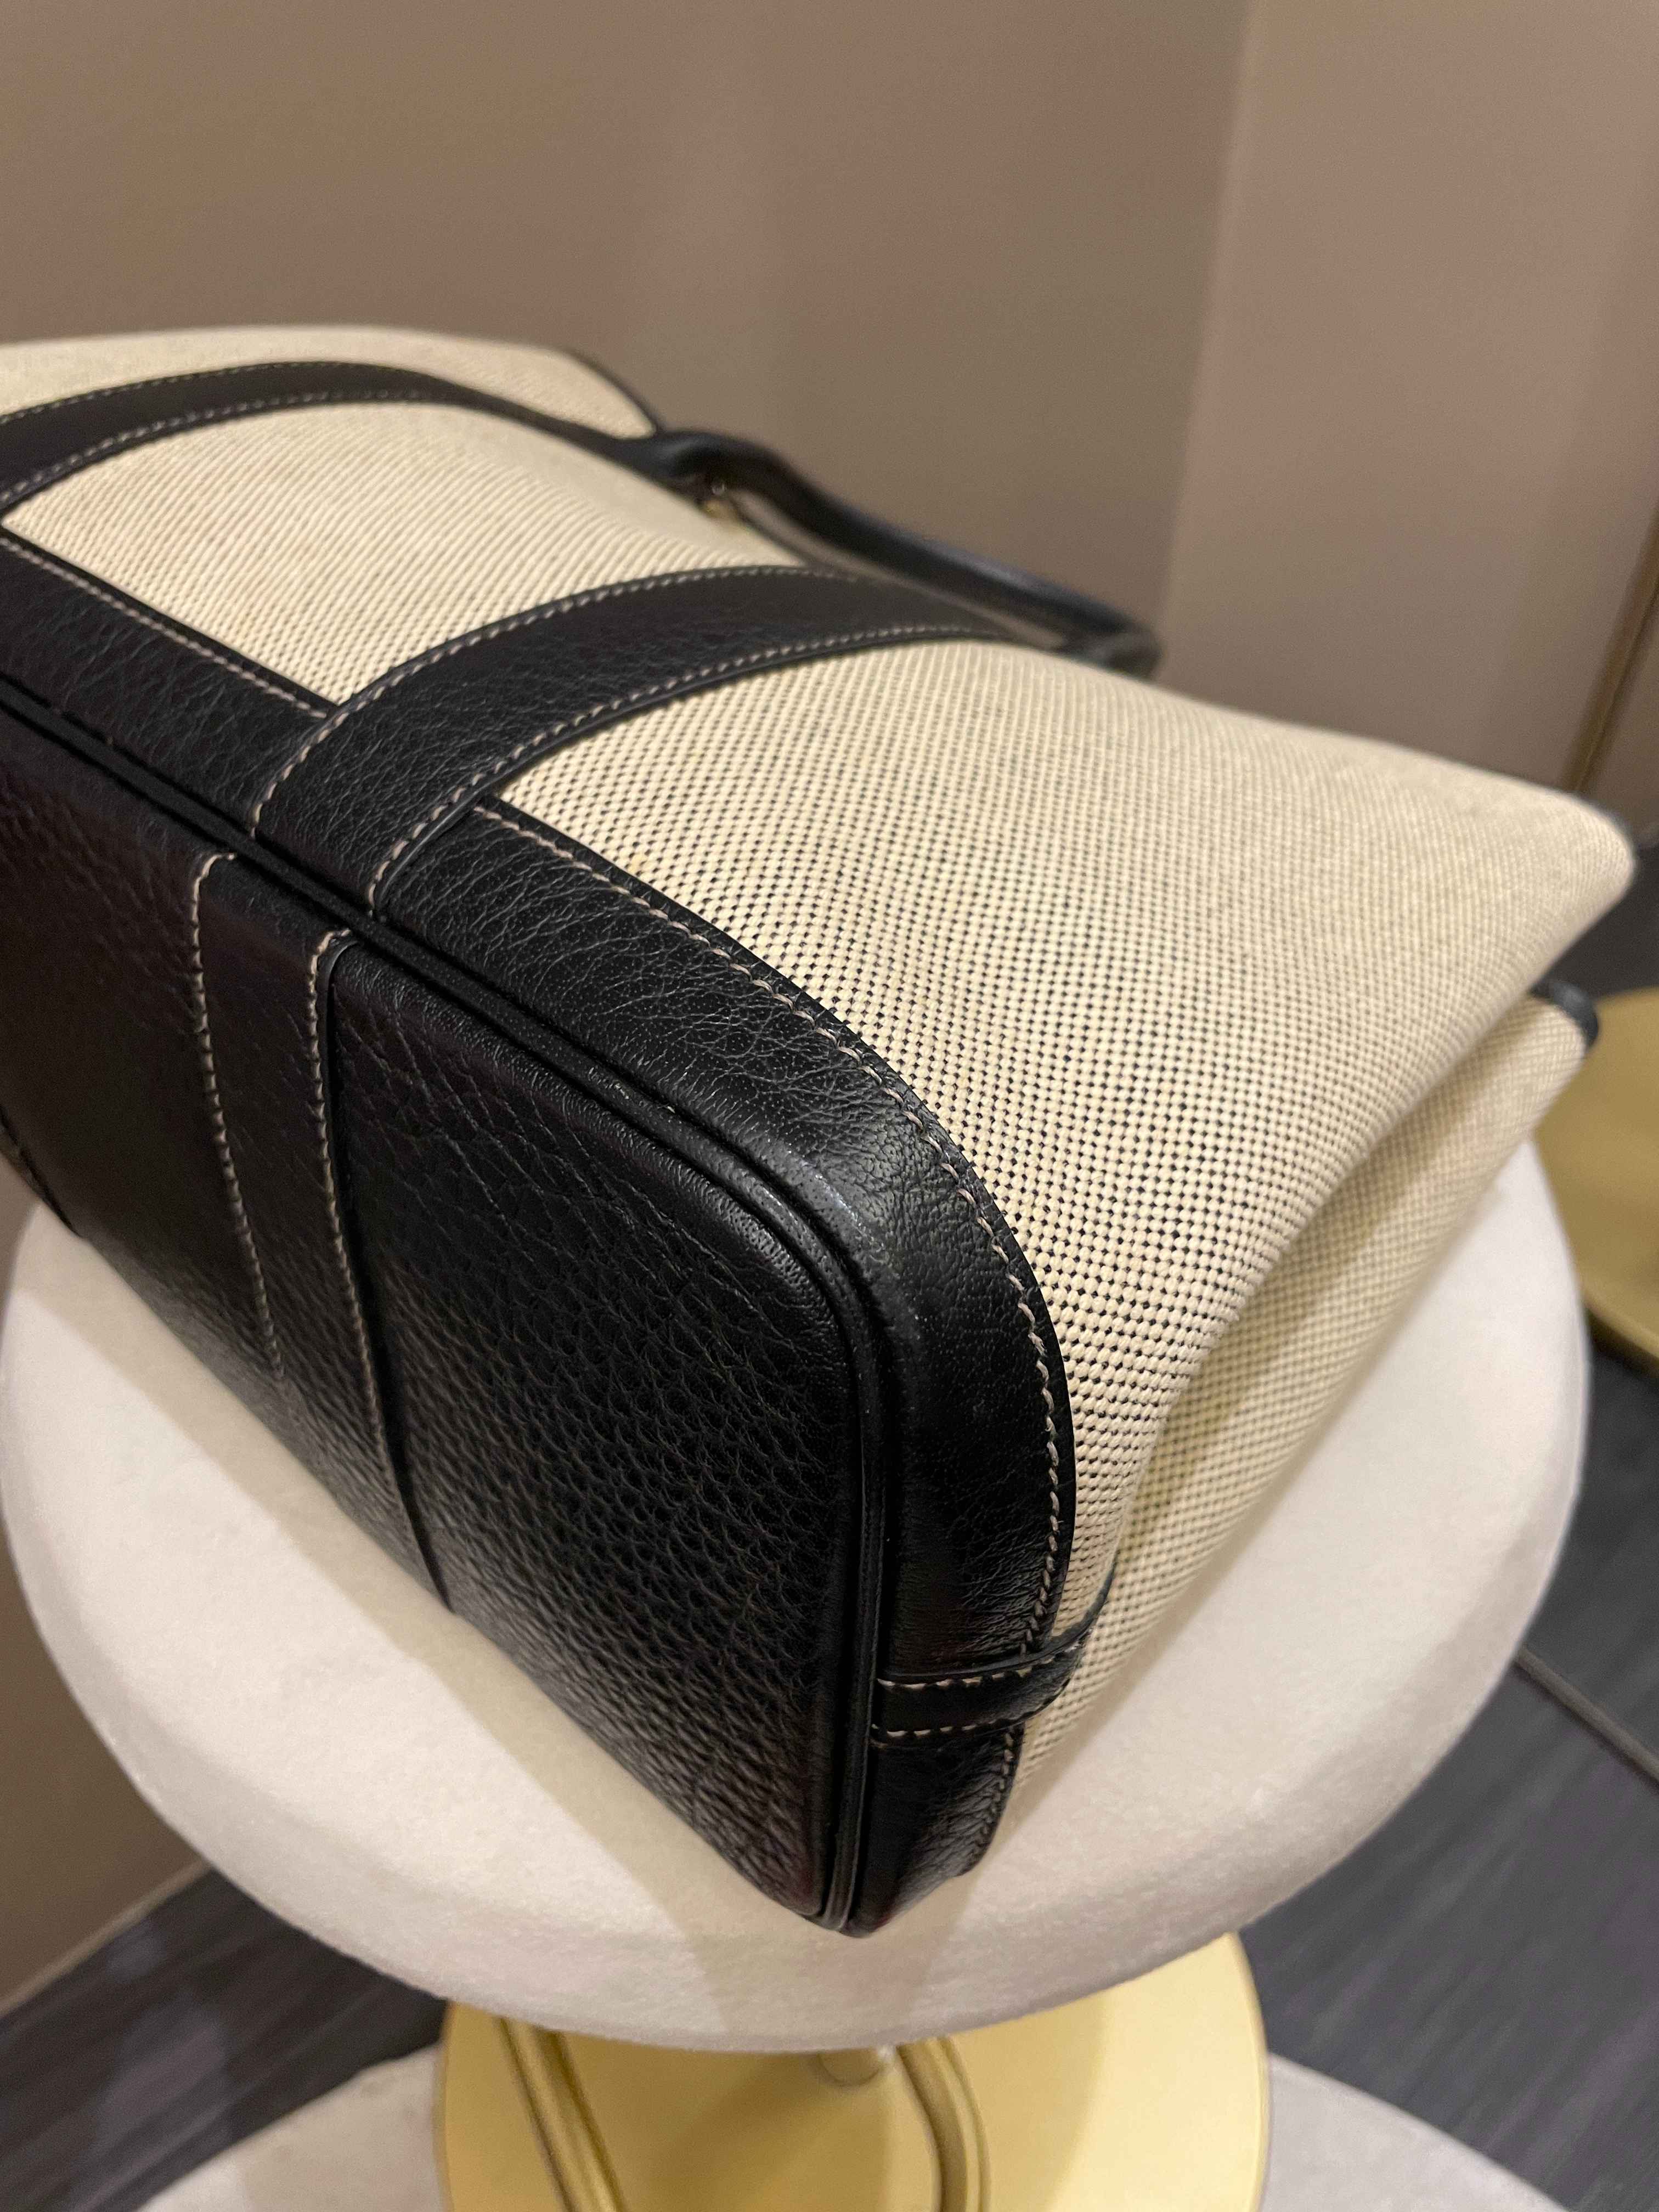 Hermès Garden Party 30 Black Canvas and Leather (Rodeo Sold